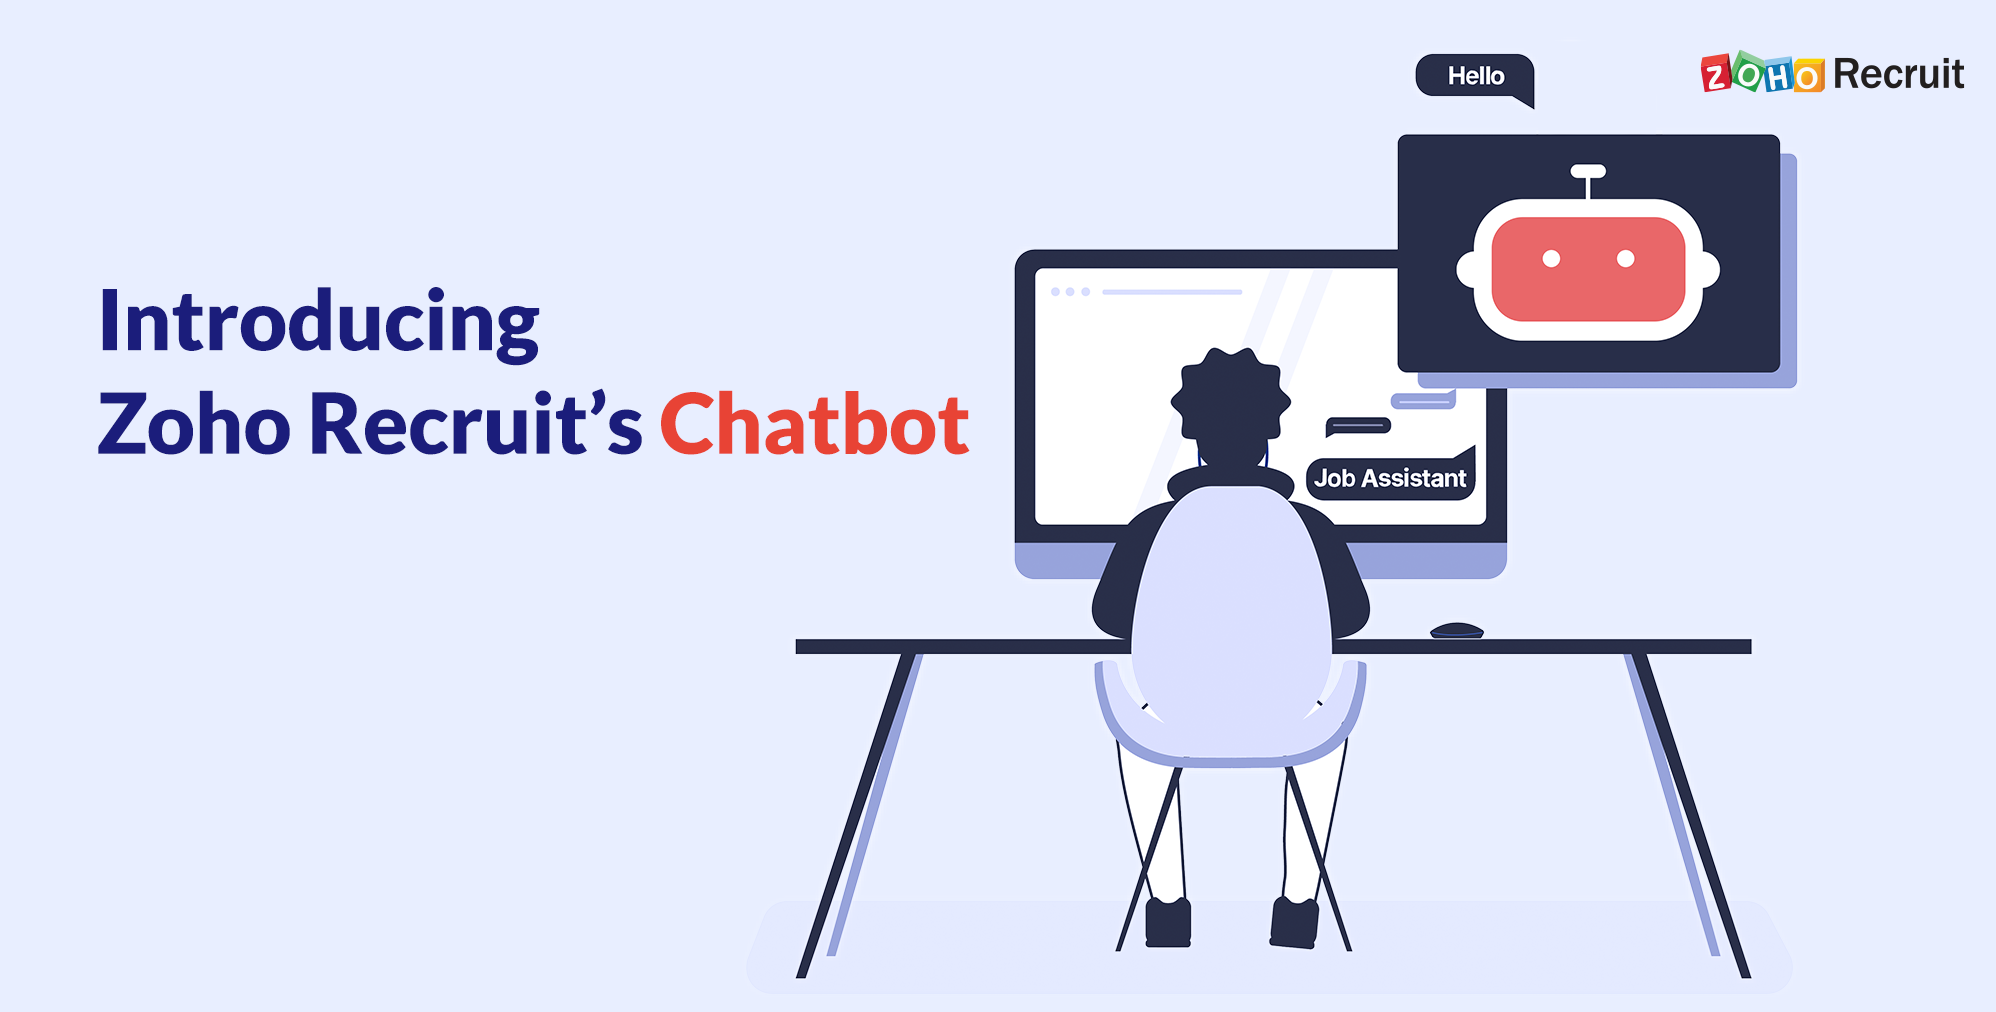 The way you communicate with a candidate can make or break their opinion of your organization. We have come up with a solution that will benefit both you, the recruiter and your candidates. Introducing Zoho Recruit's Chatbot: Zia. As your personal AI assistant, Zia works in synergy with Zoho Recruit's Career Site to keep candidates updated on job availability and help them track their job applications.